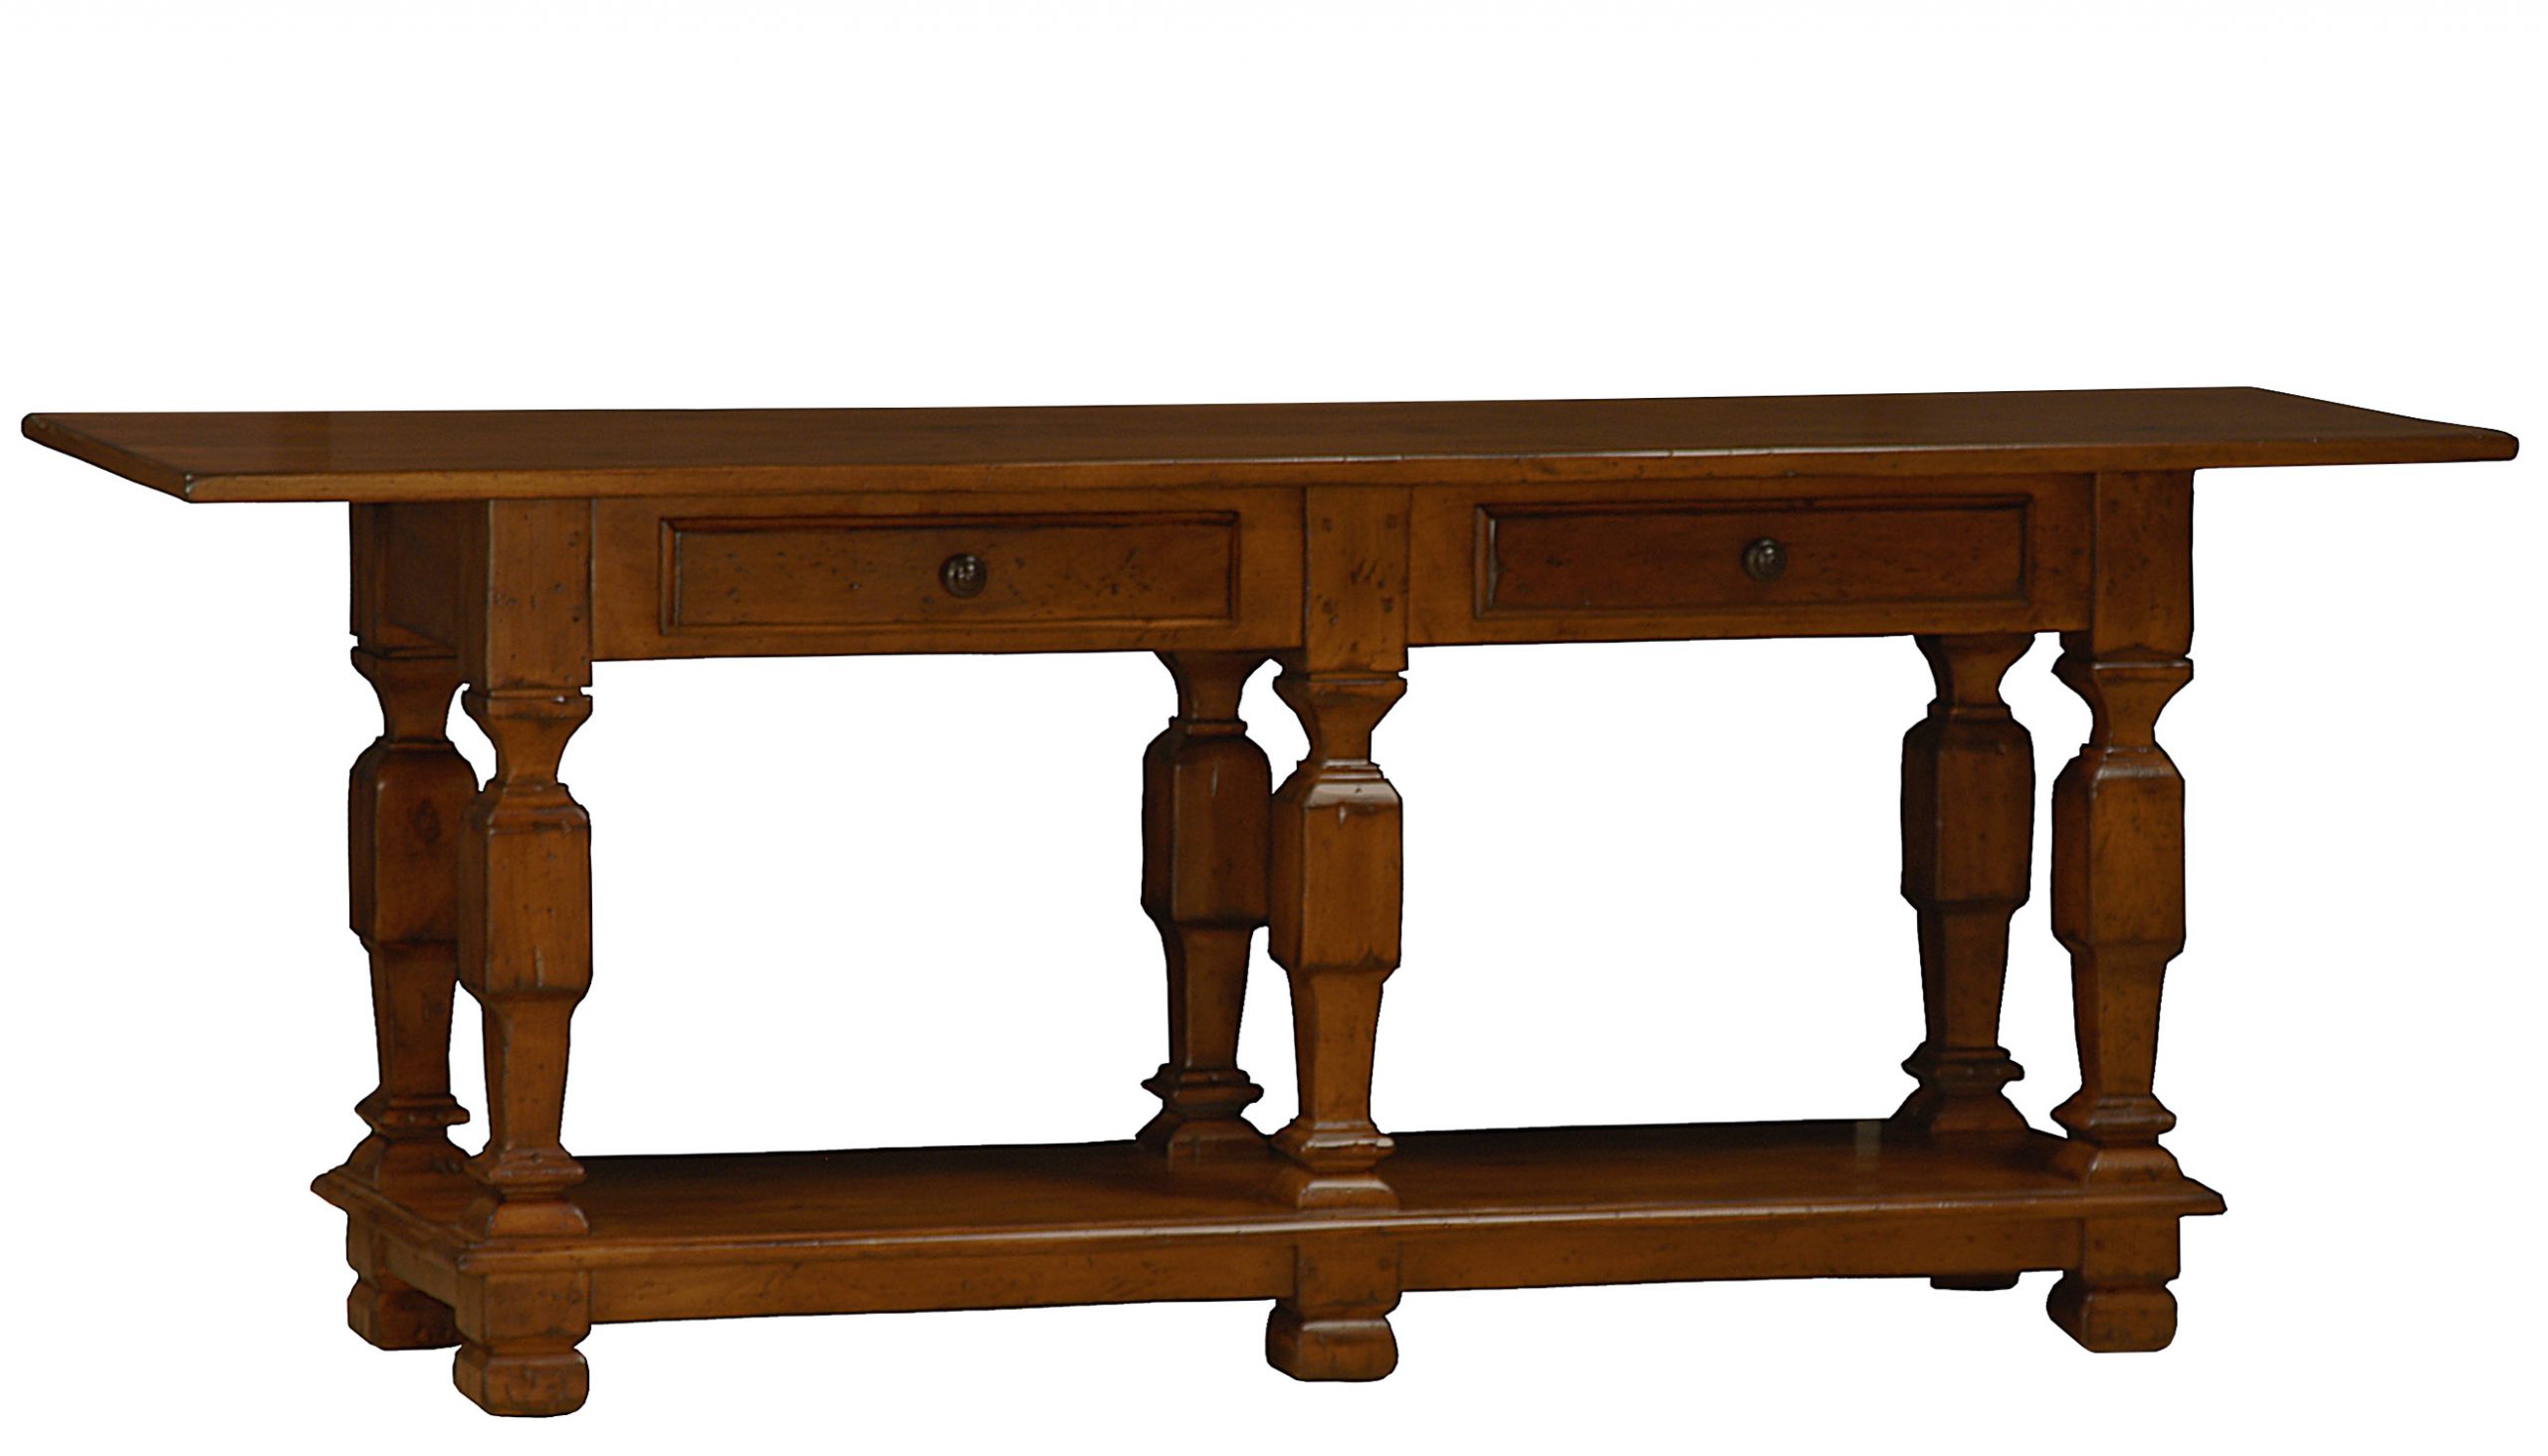 Calhoun transitional farmhouse console table sofa table with drawers and shelf by Woodland furniture in Idaho Falls